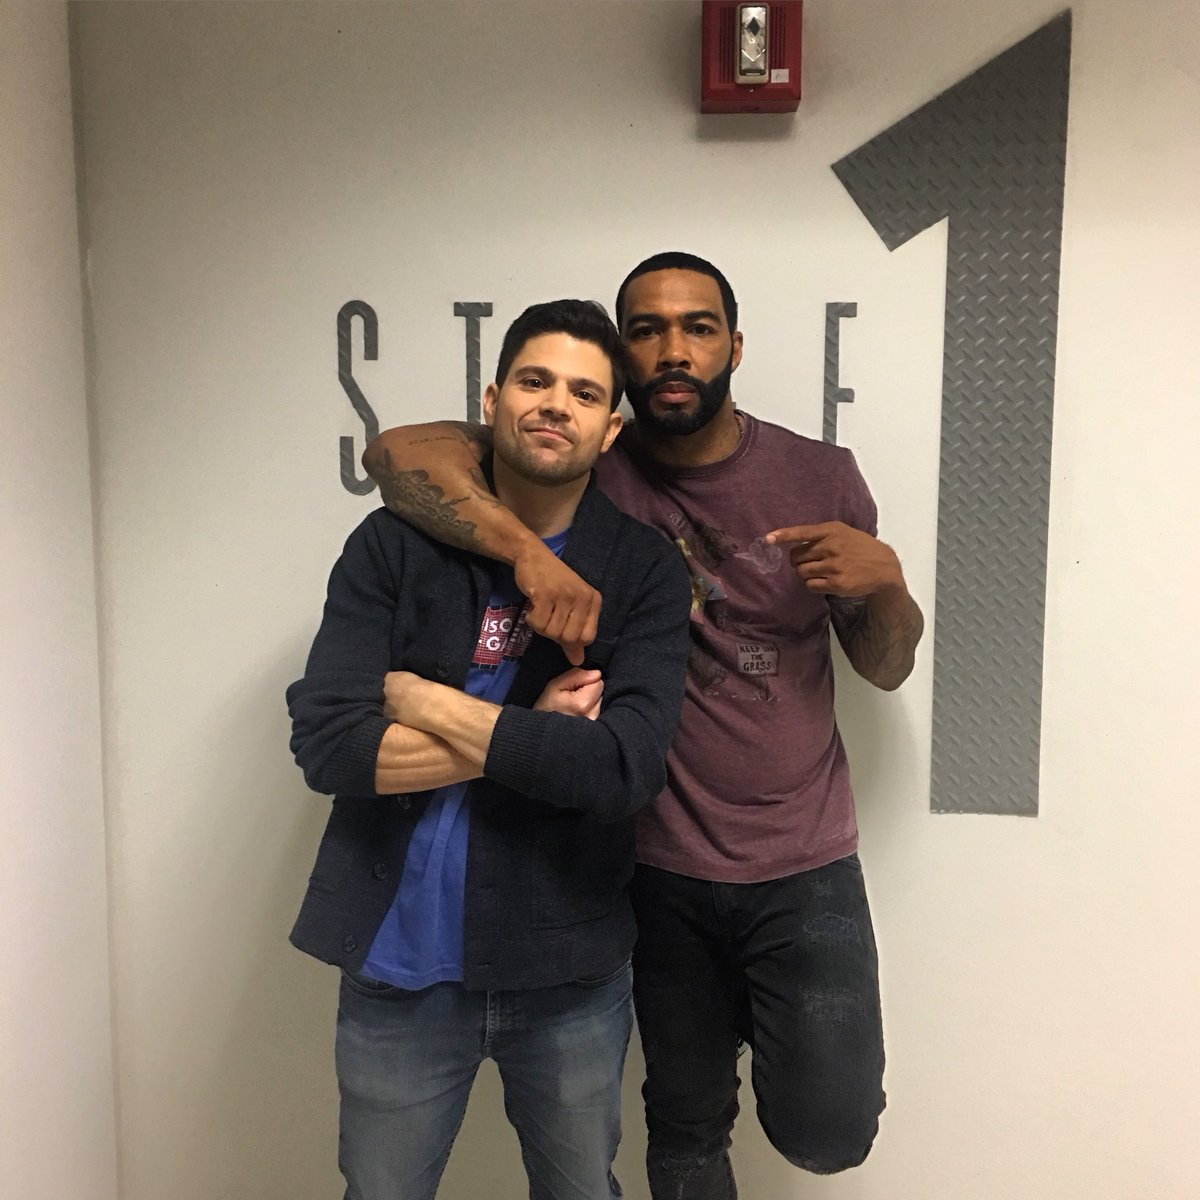 Lucky to get the chance to work with @OmariHardwick ! @Power_STARZ is coming soon! https://t.co/jWmc554TDK